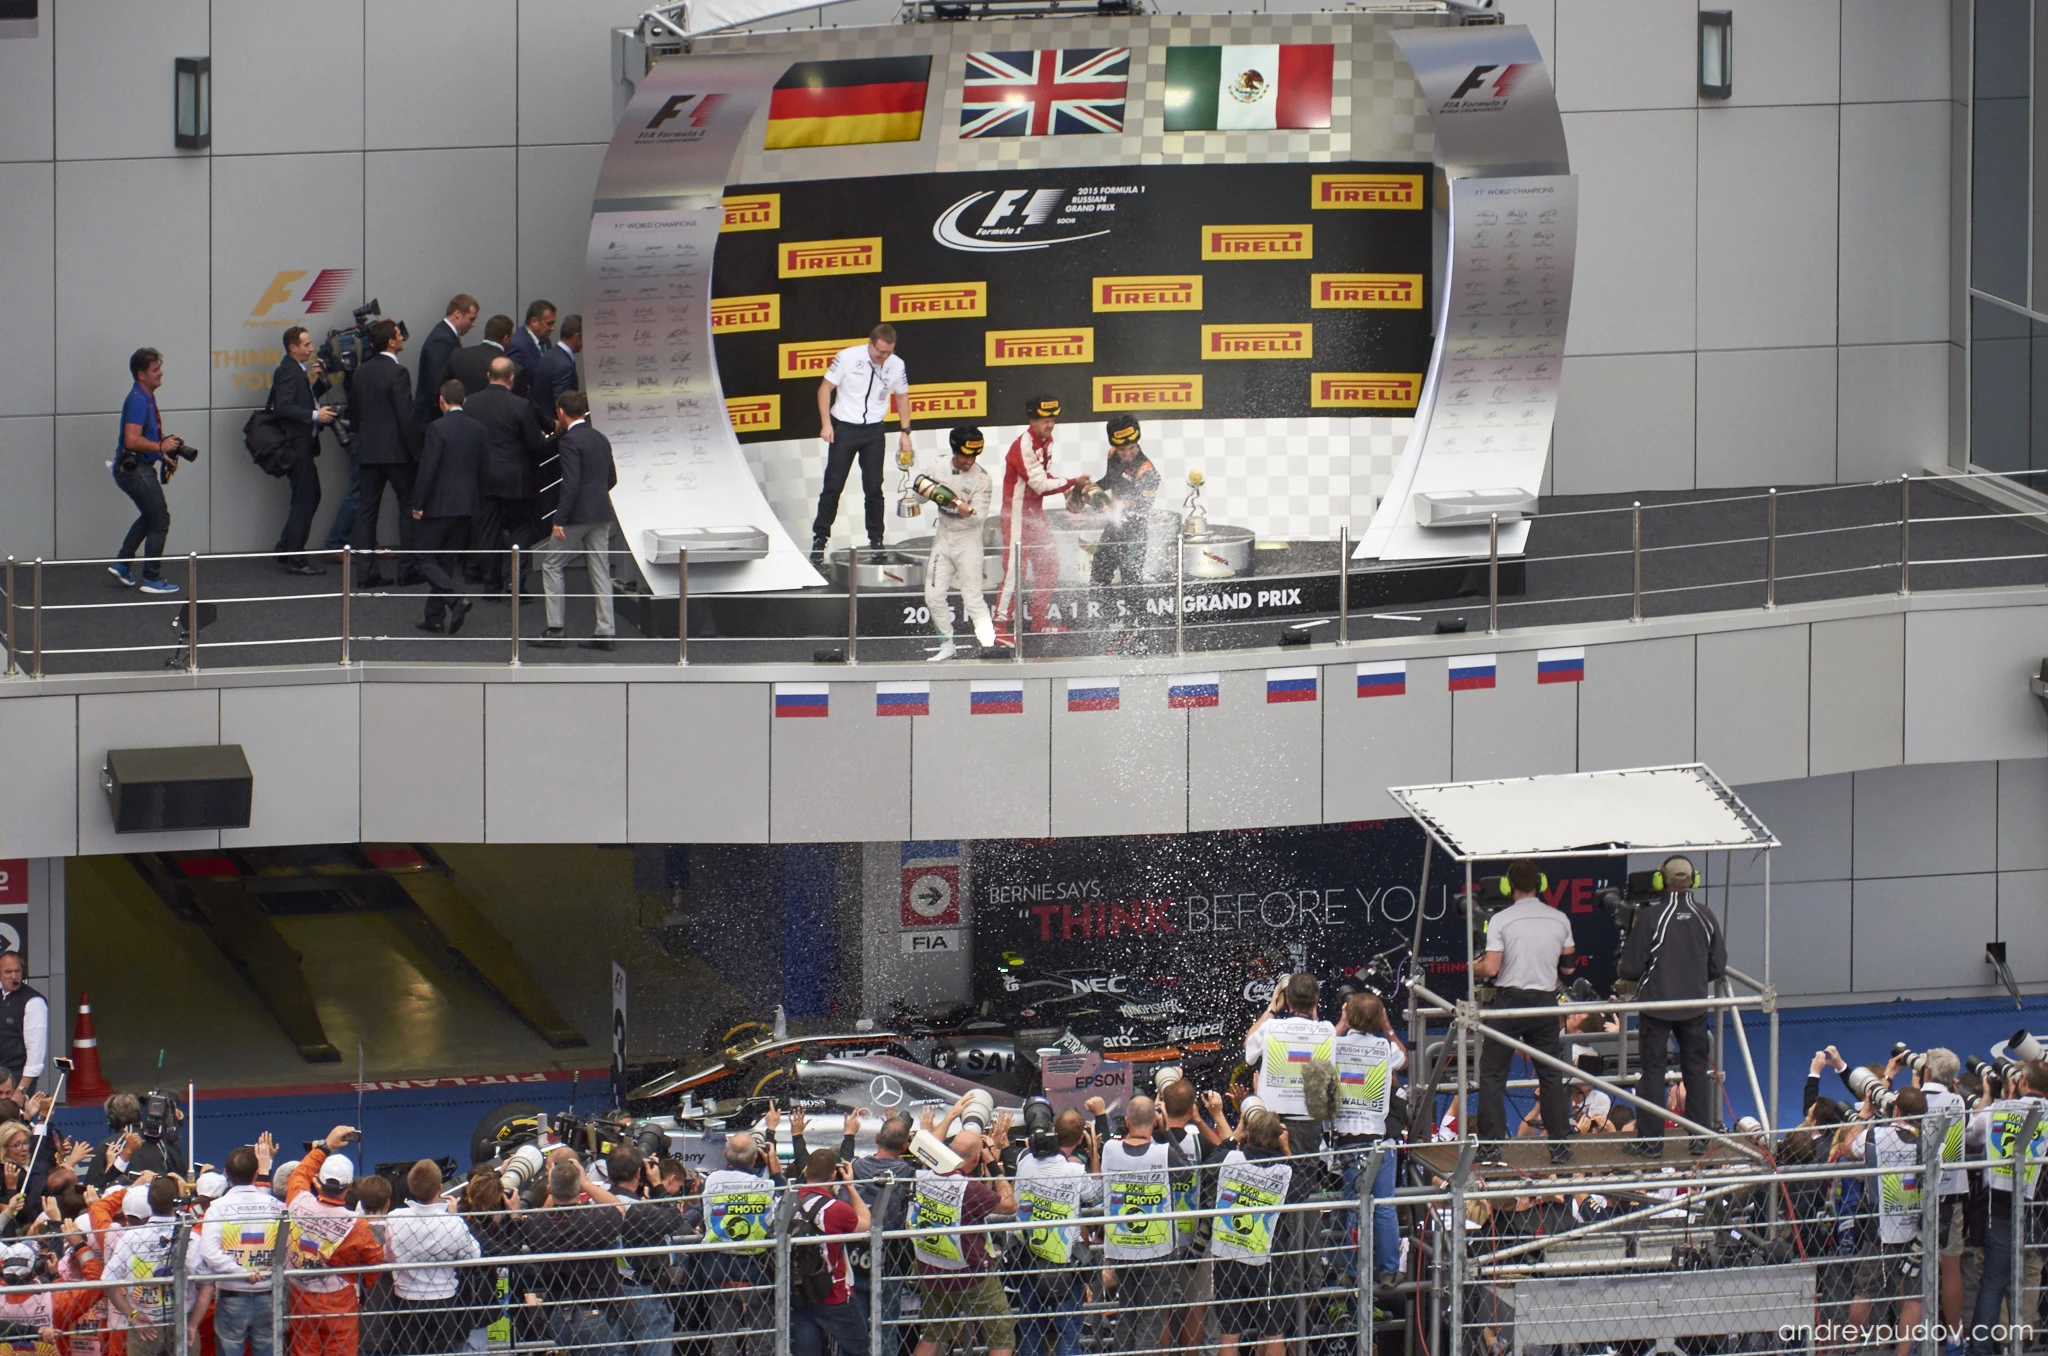 Podium Ceremony

Lewis Hamilton won the race for the second season in a row, extending his Drivers' Championship lead to 66 points. With Nico Rosberg retiring early in the race, Sebastian Vettel reclaimed second place in the standings for the first time since his round two victory in Malaysia with a second-place finish. Sergio Pérez completed the podium in third for Force India. 